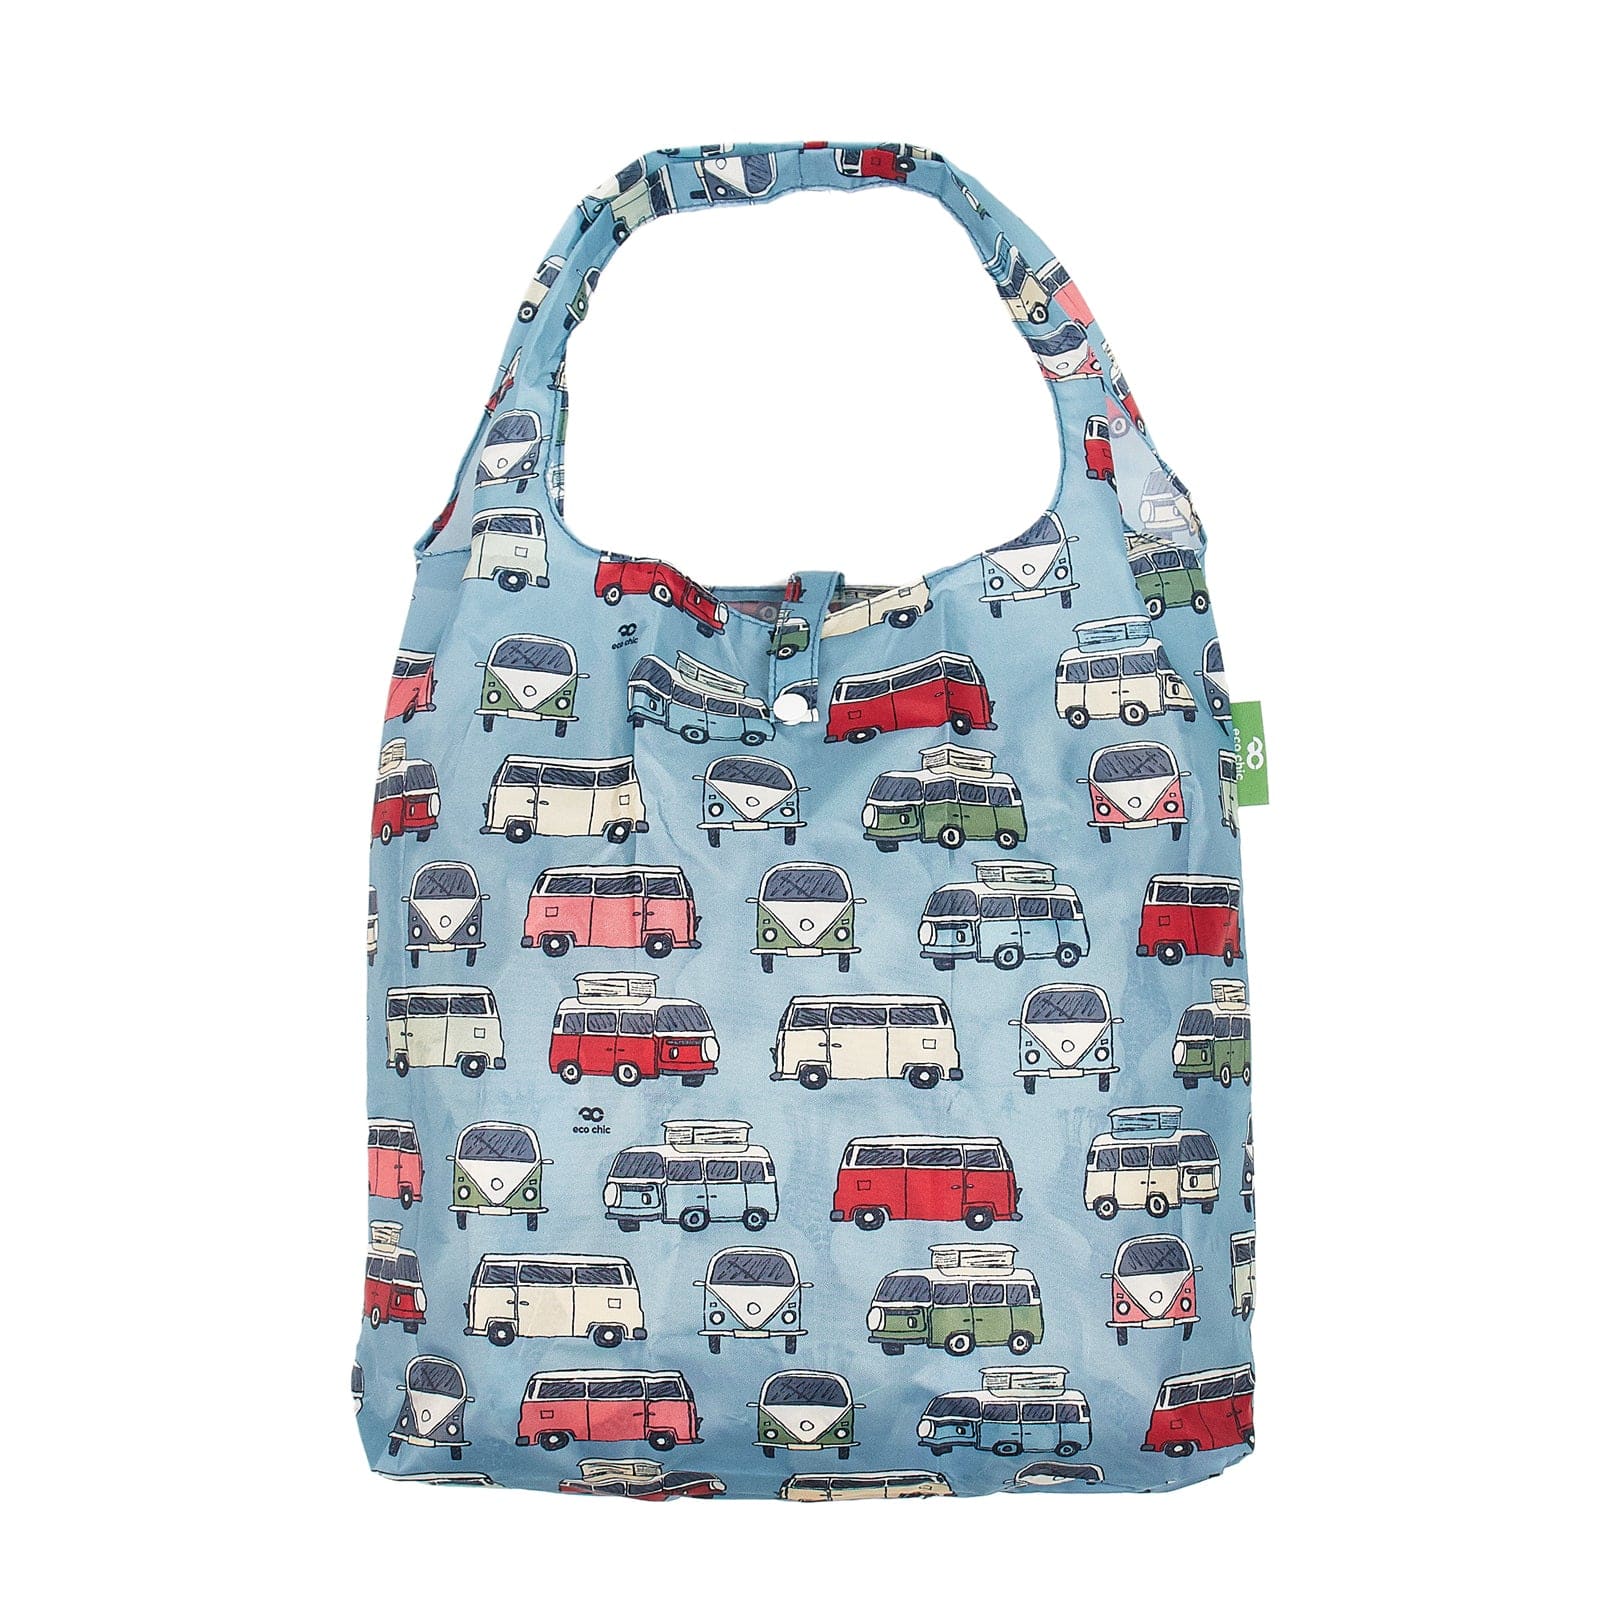 Eco Chic Blue Eco Chic Lightweight Foldable Reusable Shopping Bag Campervan